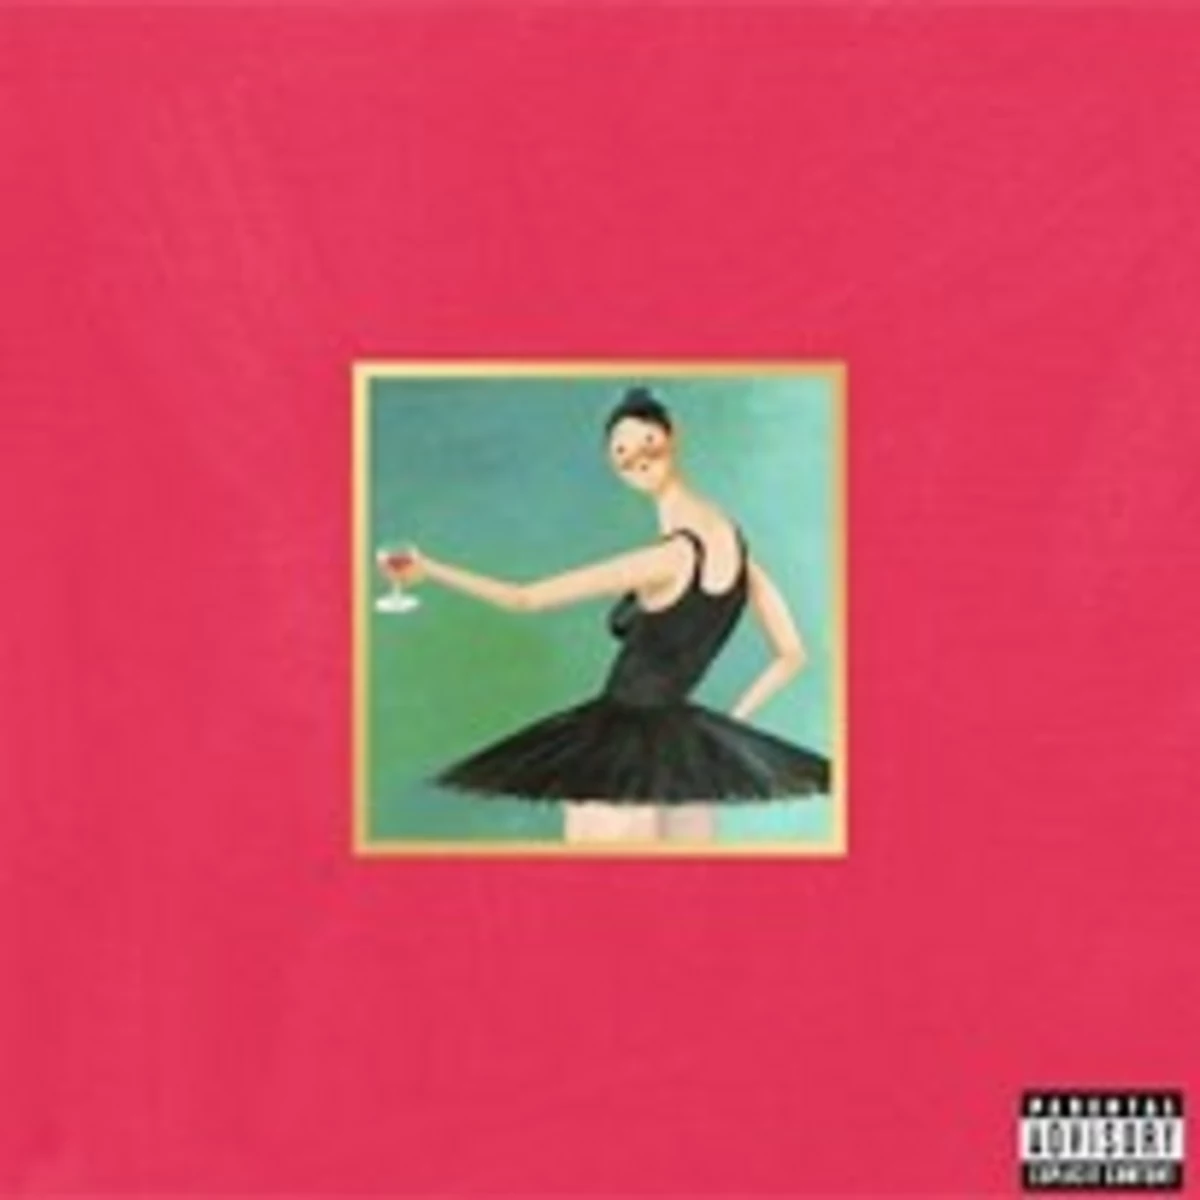 Kanye West's 'My Beautiful Dark Twisted Fantasy' Only $3.99